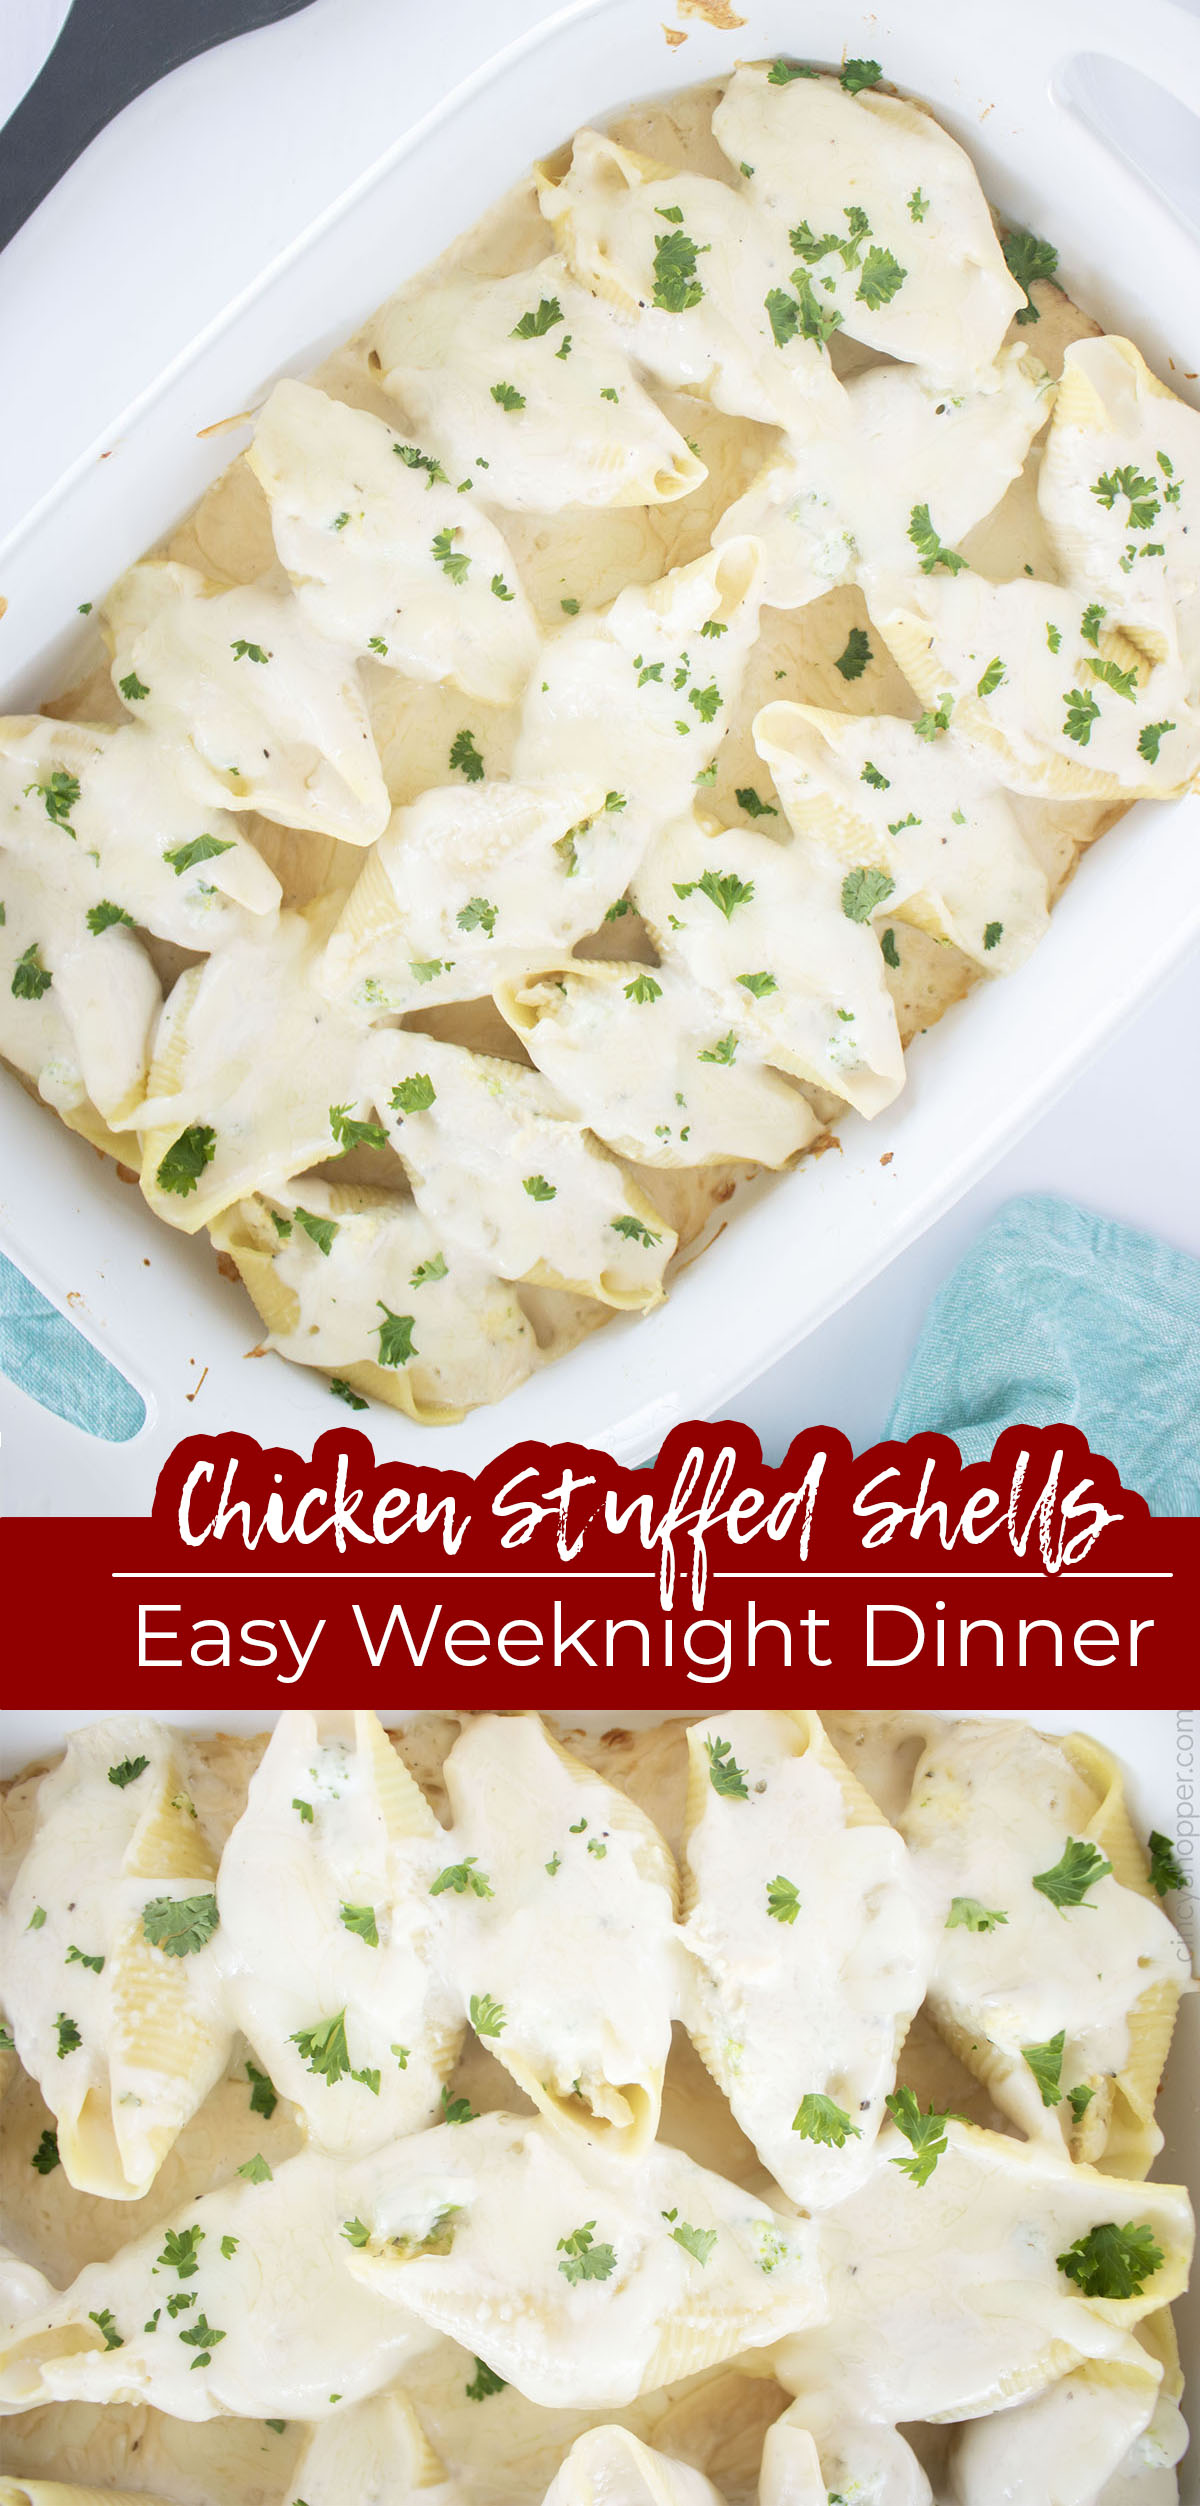 Long pin with Text on image Chicken Stuffed Shells and easy weeknight dinner.